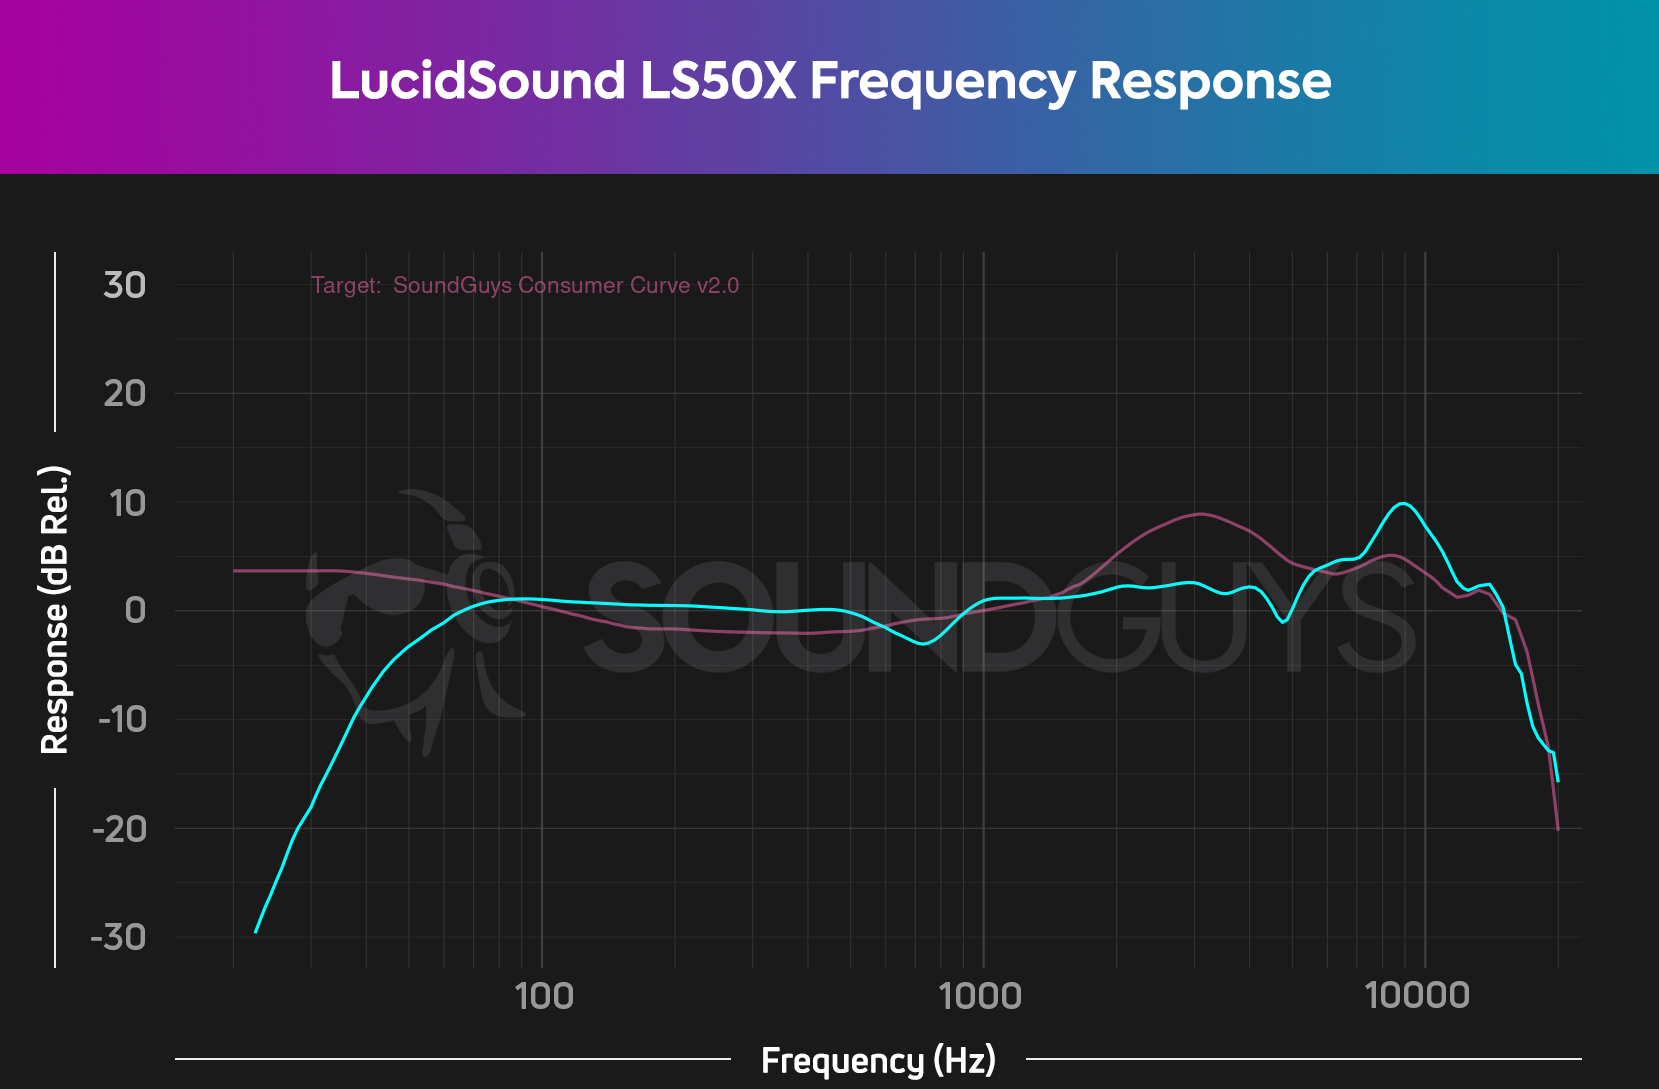 A chart depicts the LucidSound LS50X (cyan) gaming headset's frequency response relative to the SoundGuys Consumer Curve V2 (pink), and shows the headset's under-emphasized sub-bass response.